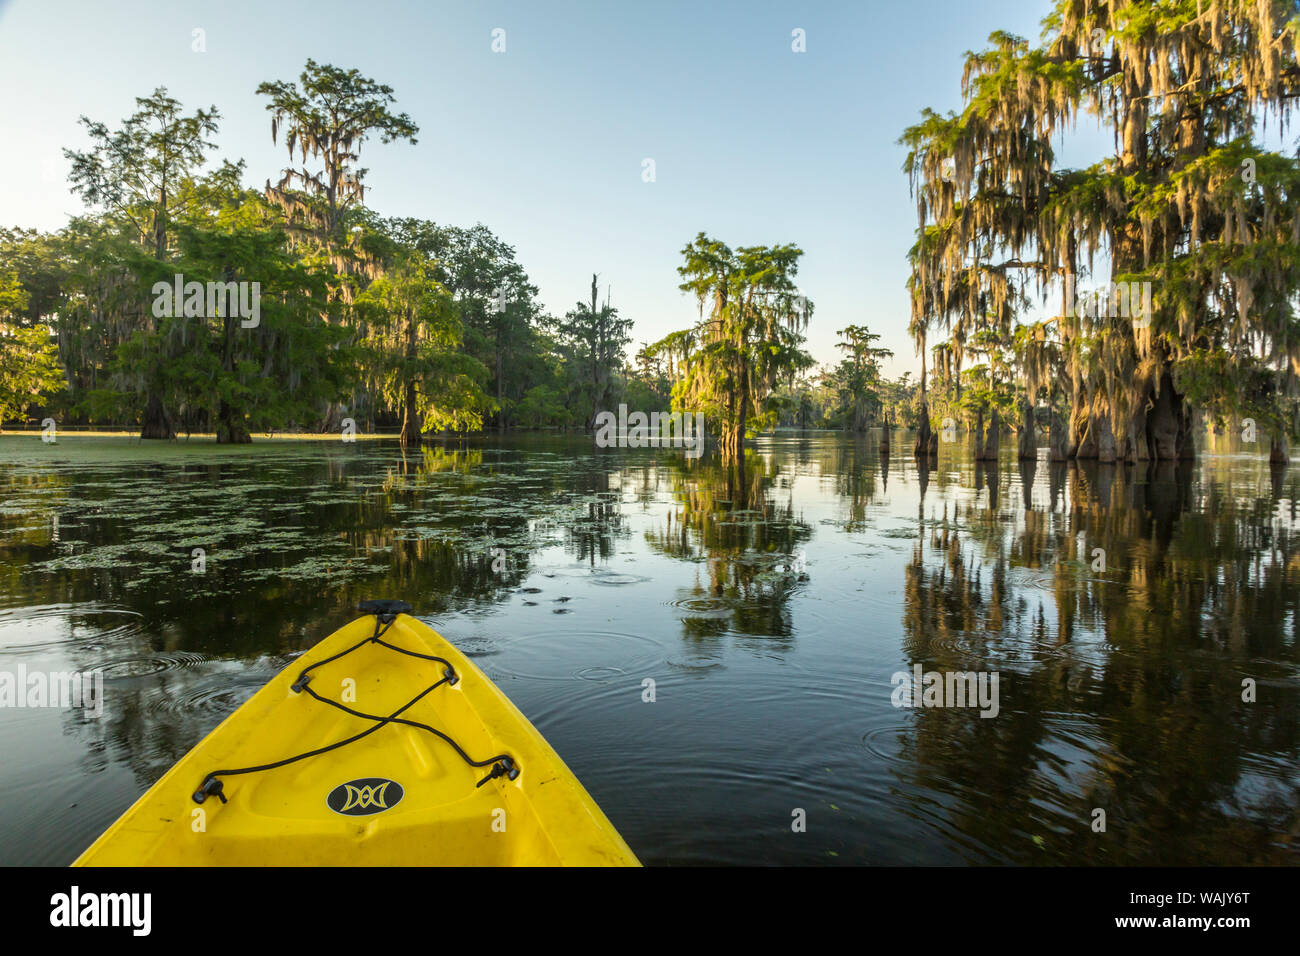 USA, Louisiana, Lake Martin. Kayaking in cypress swamp forest. Credit as: Cathy and Gordon Illg / Jaynes Gallery / DanitaDelimont.com Stock Photo